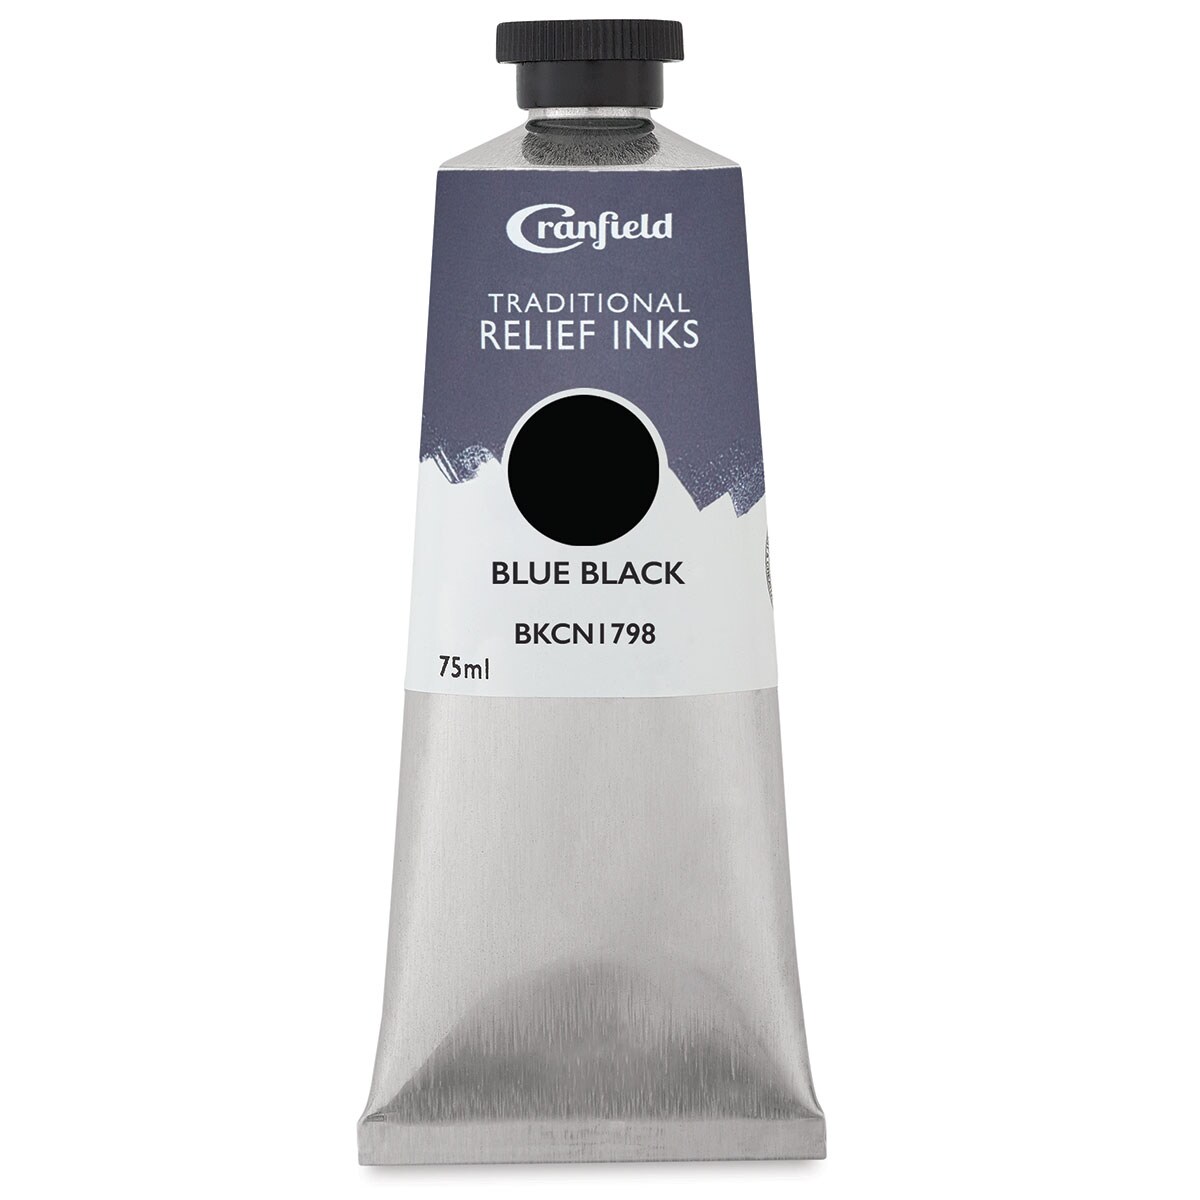 Cranfield Traditional Relief Ink - Blue Black, 75 ml | Michaels